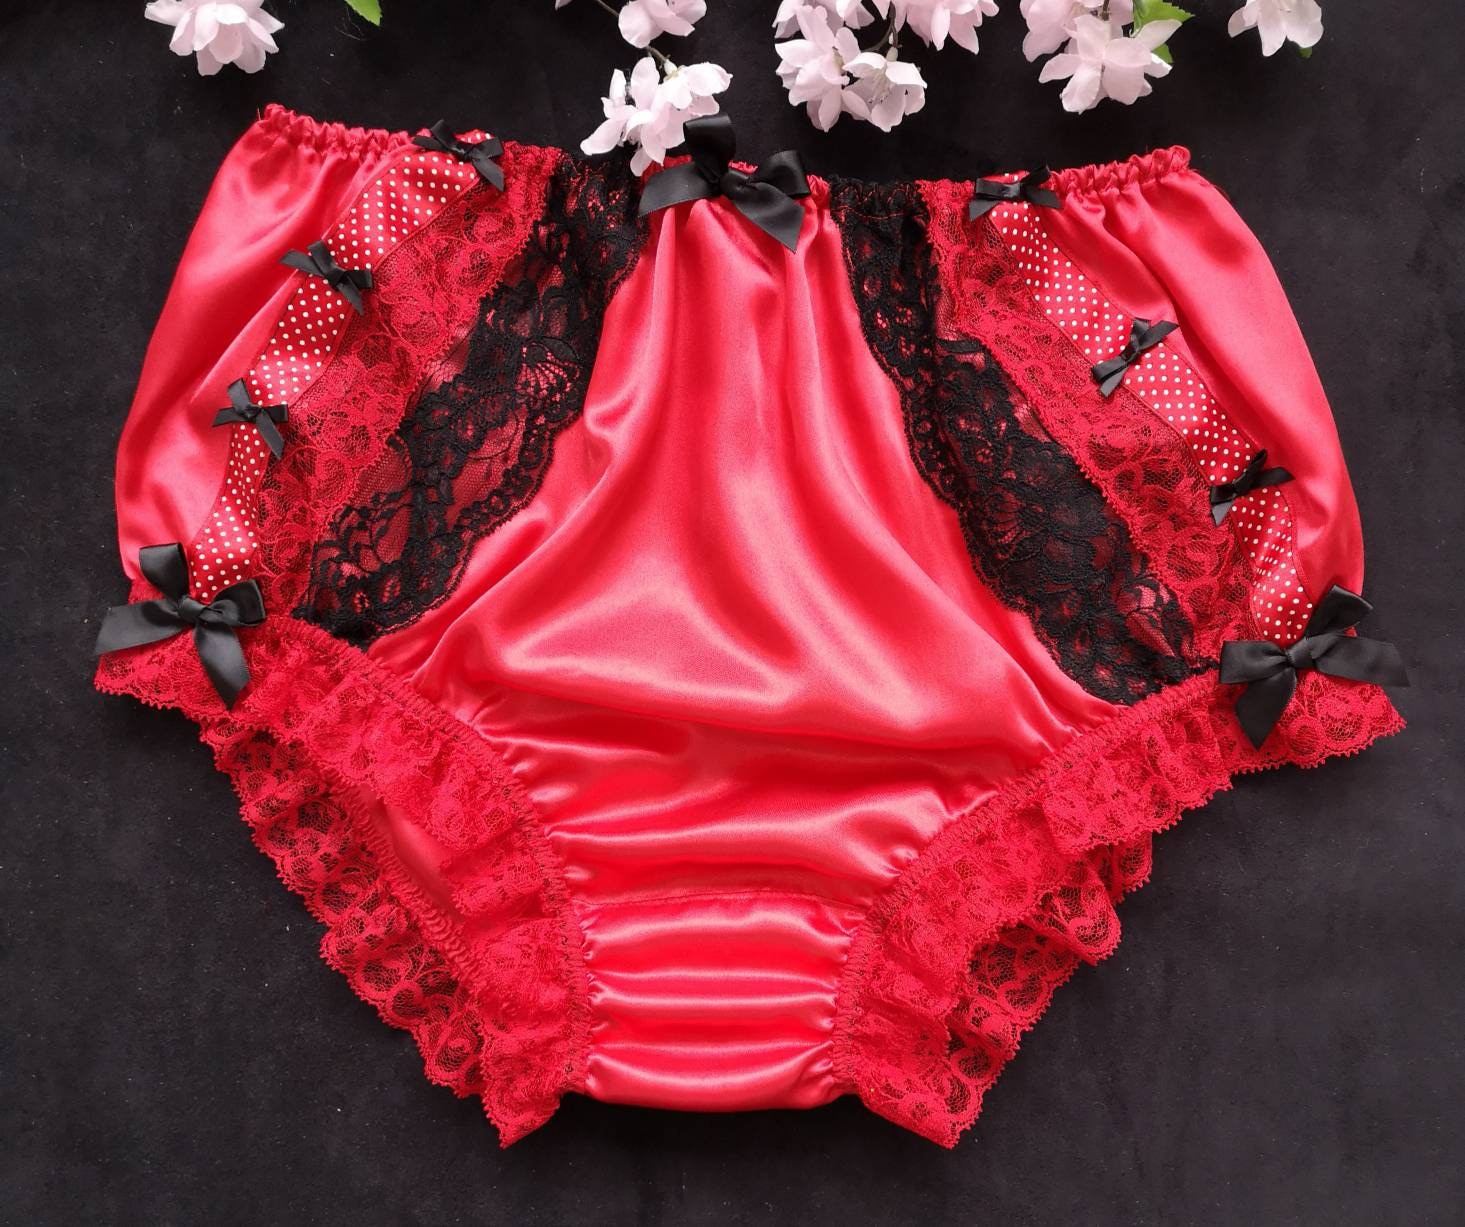 Sexy Lace Open Bottom Underpants Low-waist Panties for Women